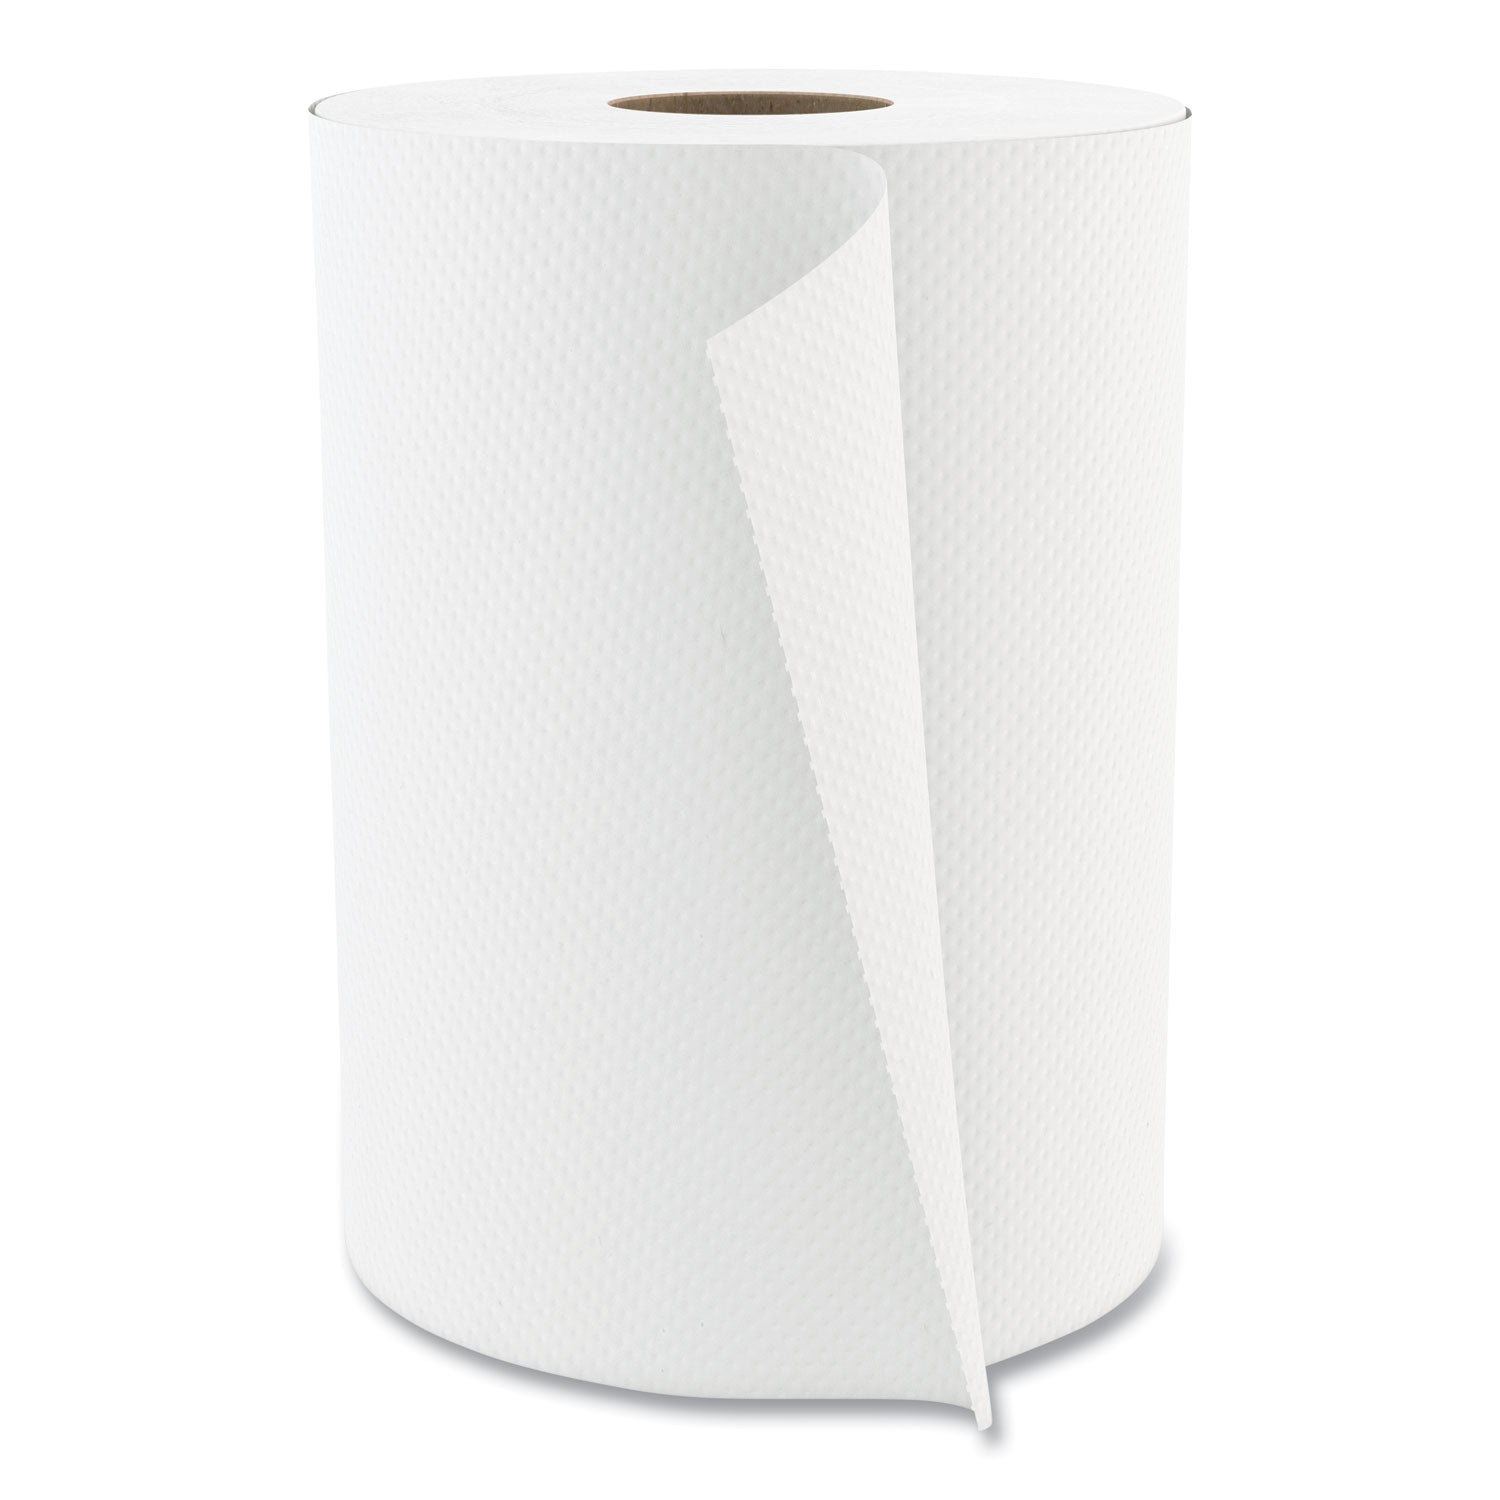 select-roll-paper-towels-1-ply-788-x-350-ft-white-12-rolls-carton_csdh030 - 1